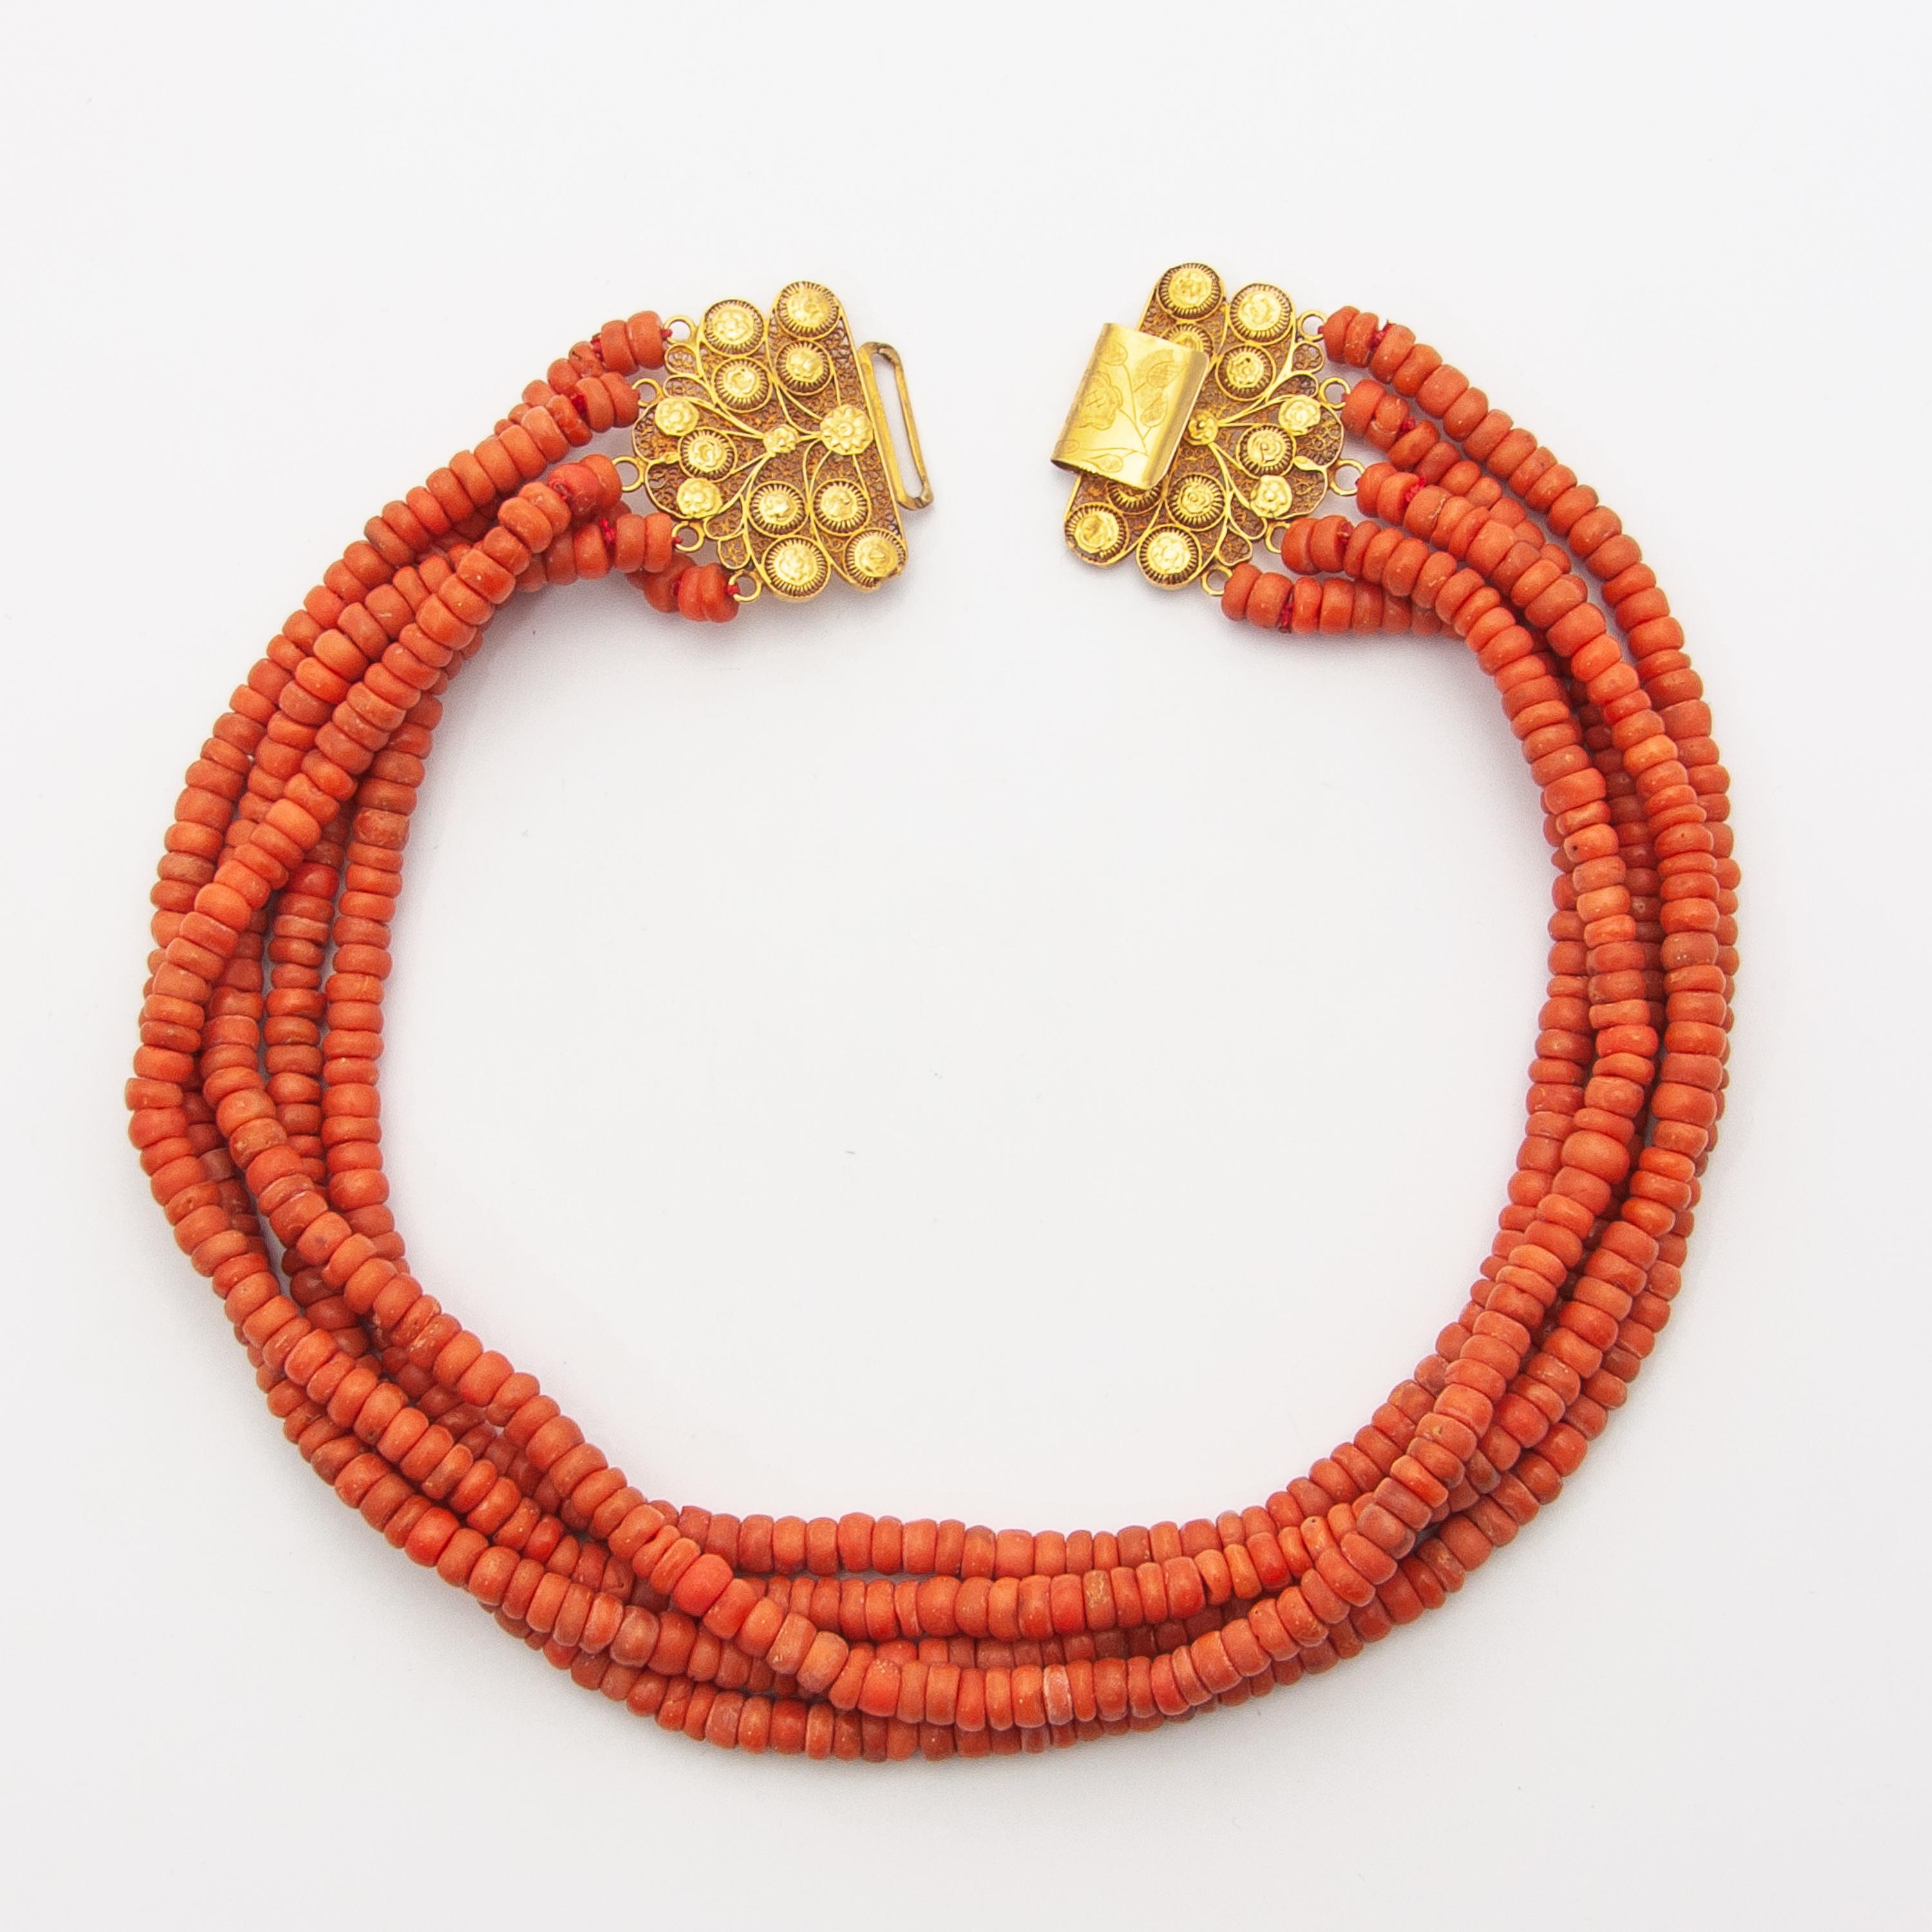 An antique 19th century natural coral necklace created with an impressive large worked 14 karat gold clasp. The clasp is beautifully made of fine filigree and cannetille work, the craftsmanship is stunning. The closure of the clasp is engraved with